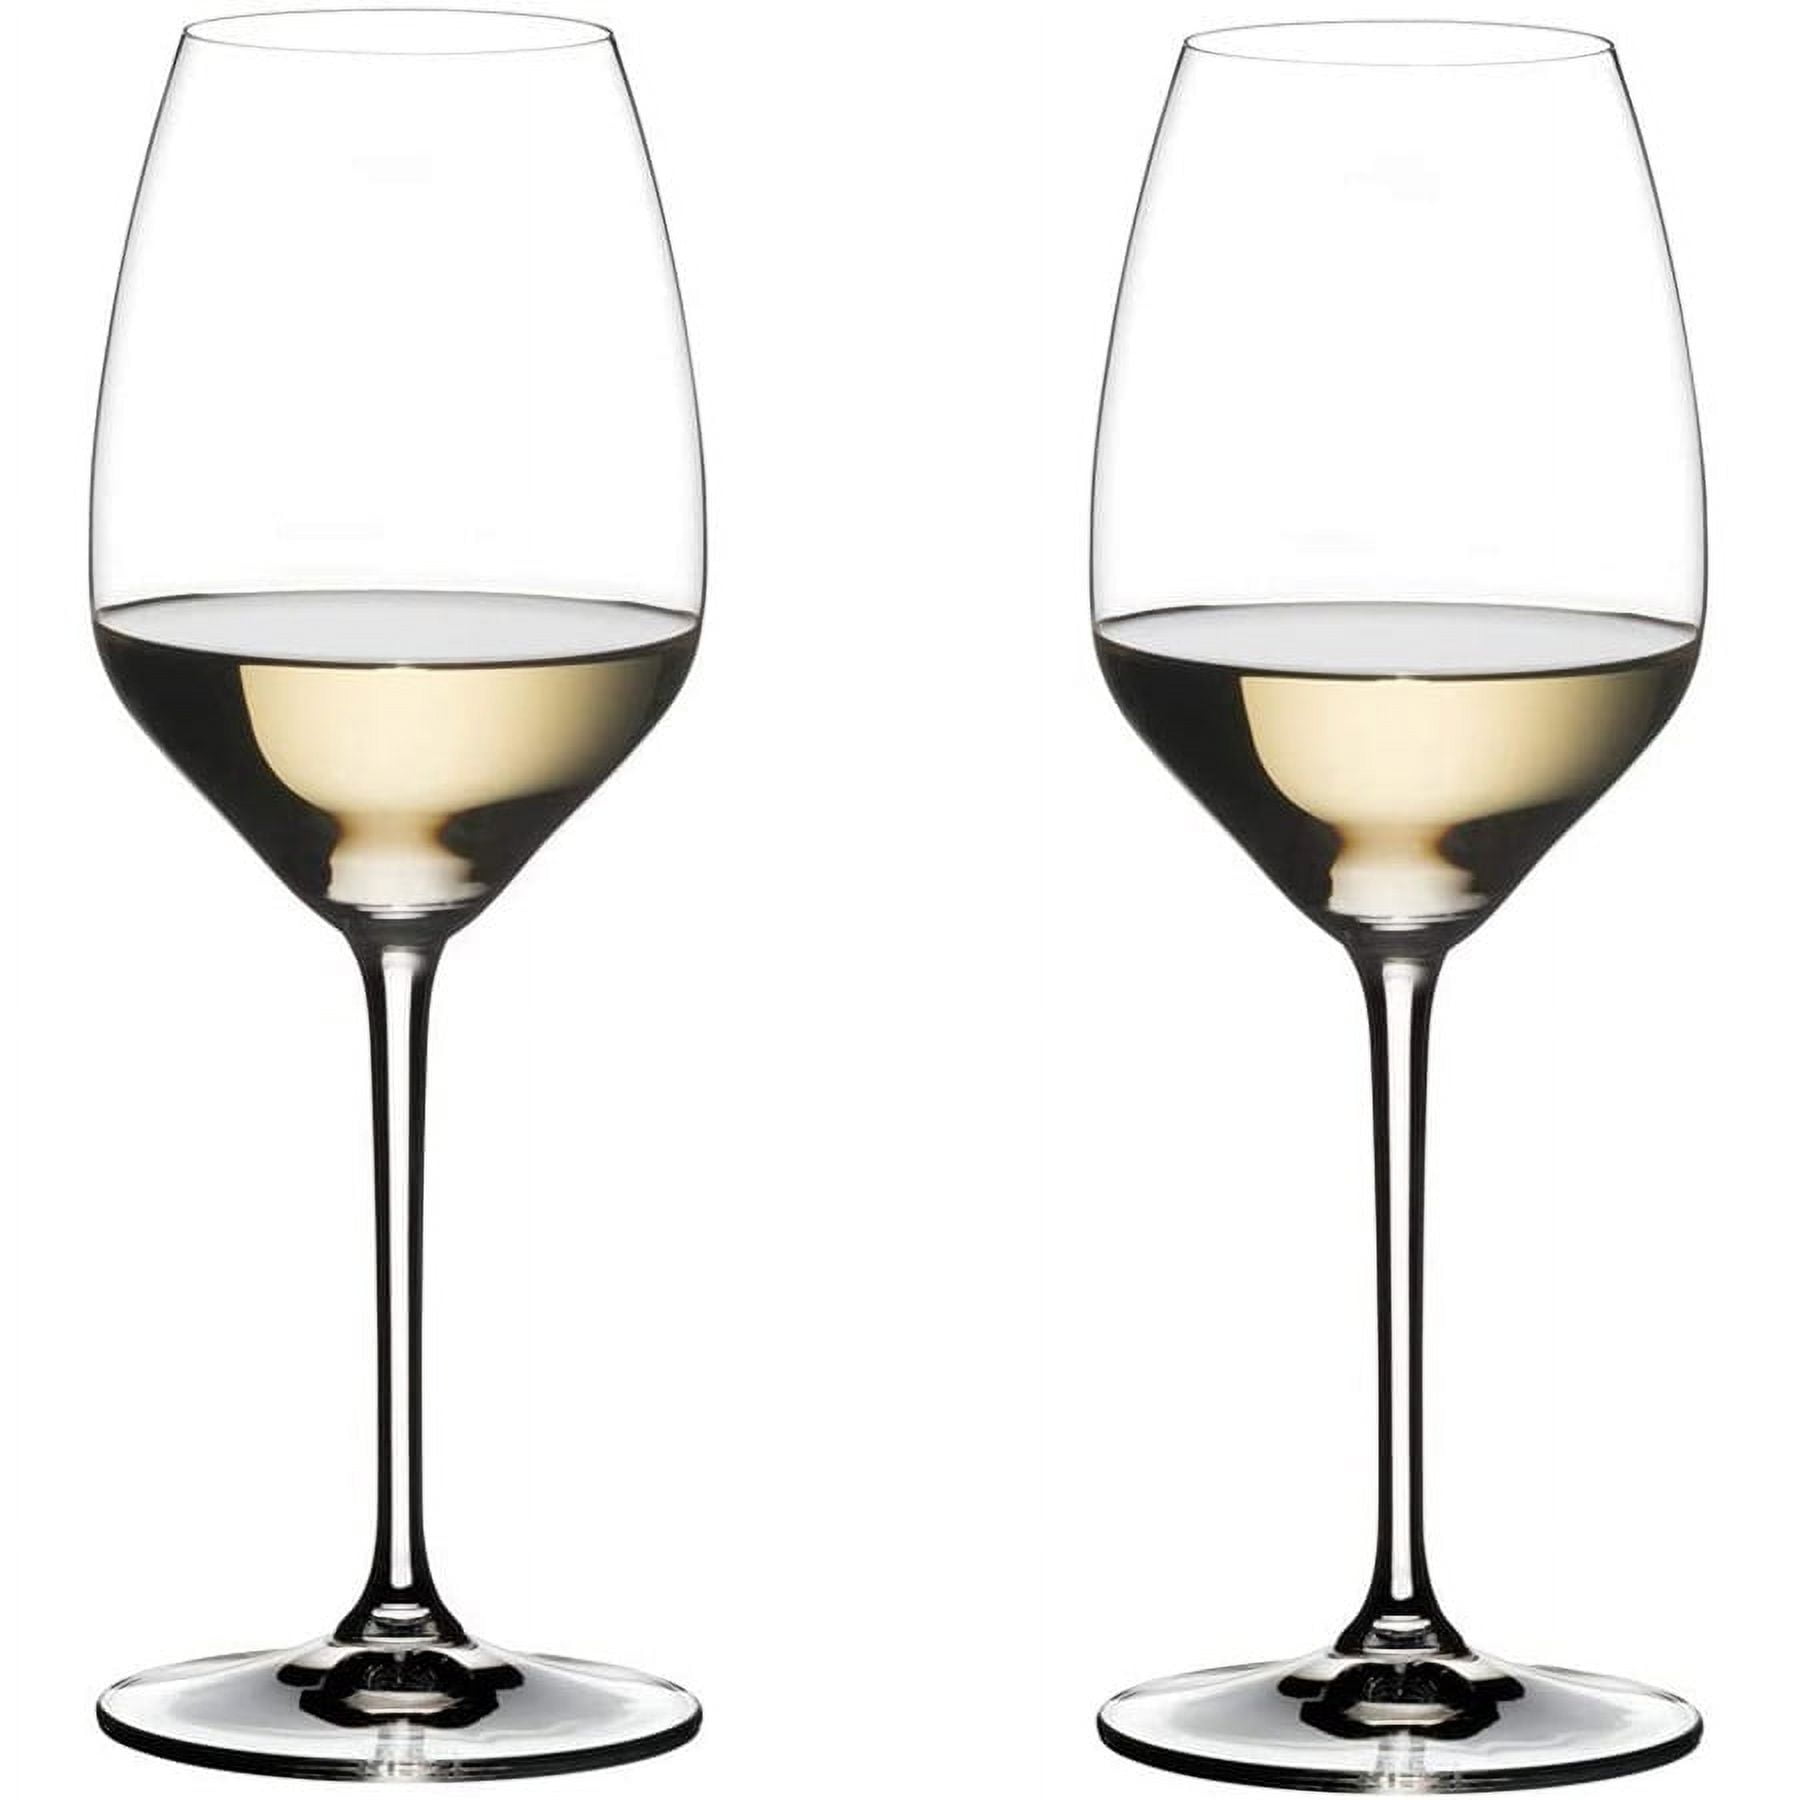 Riedel Extreme Rose Wine Glasses, Set of 2 - Macy's